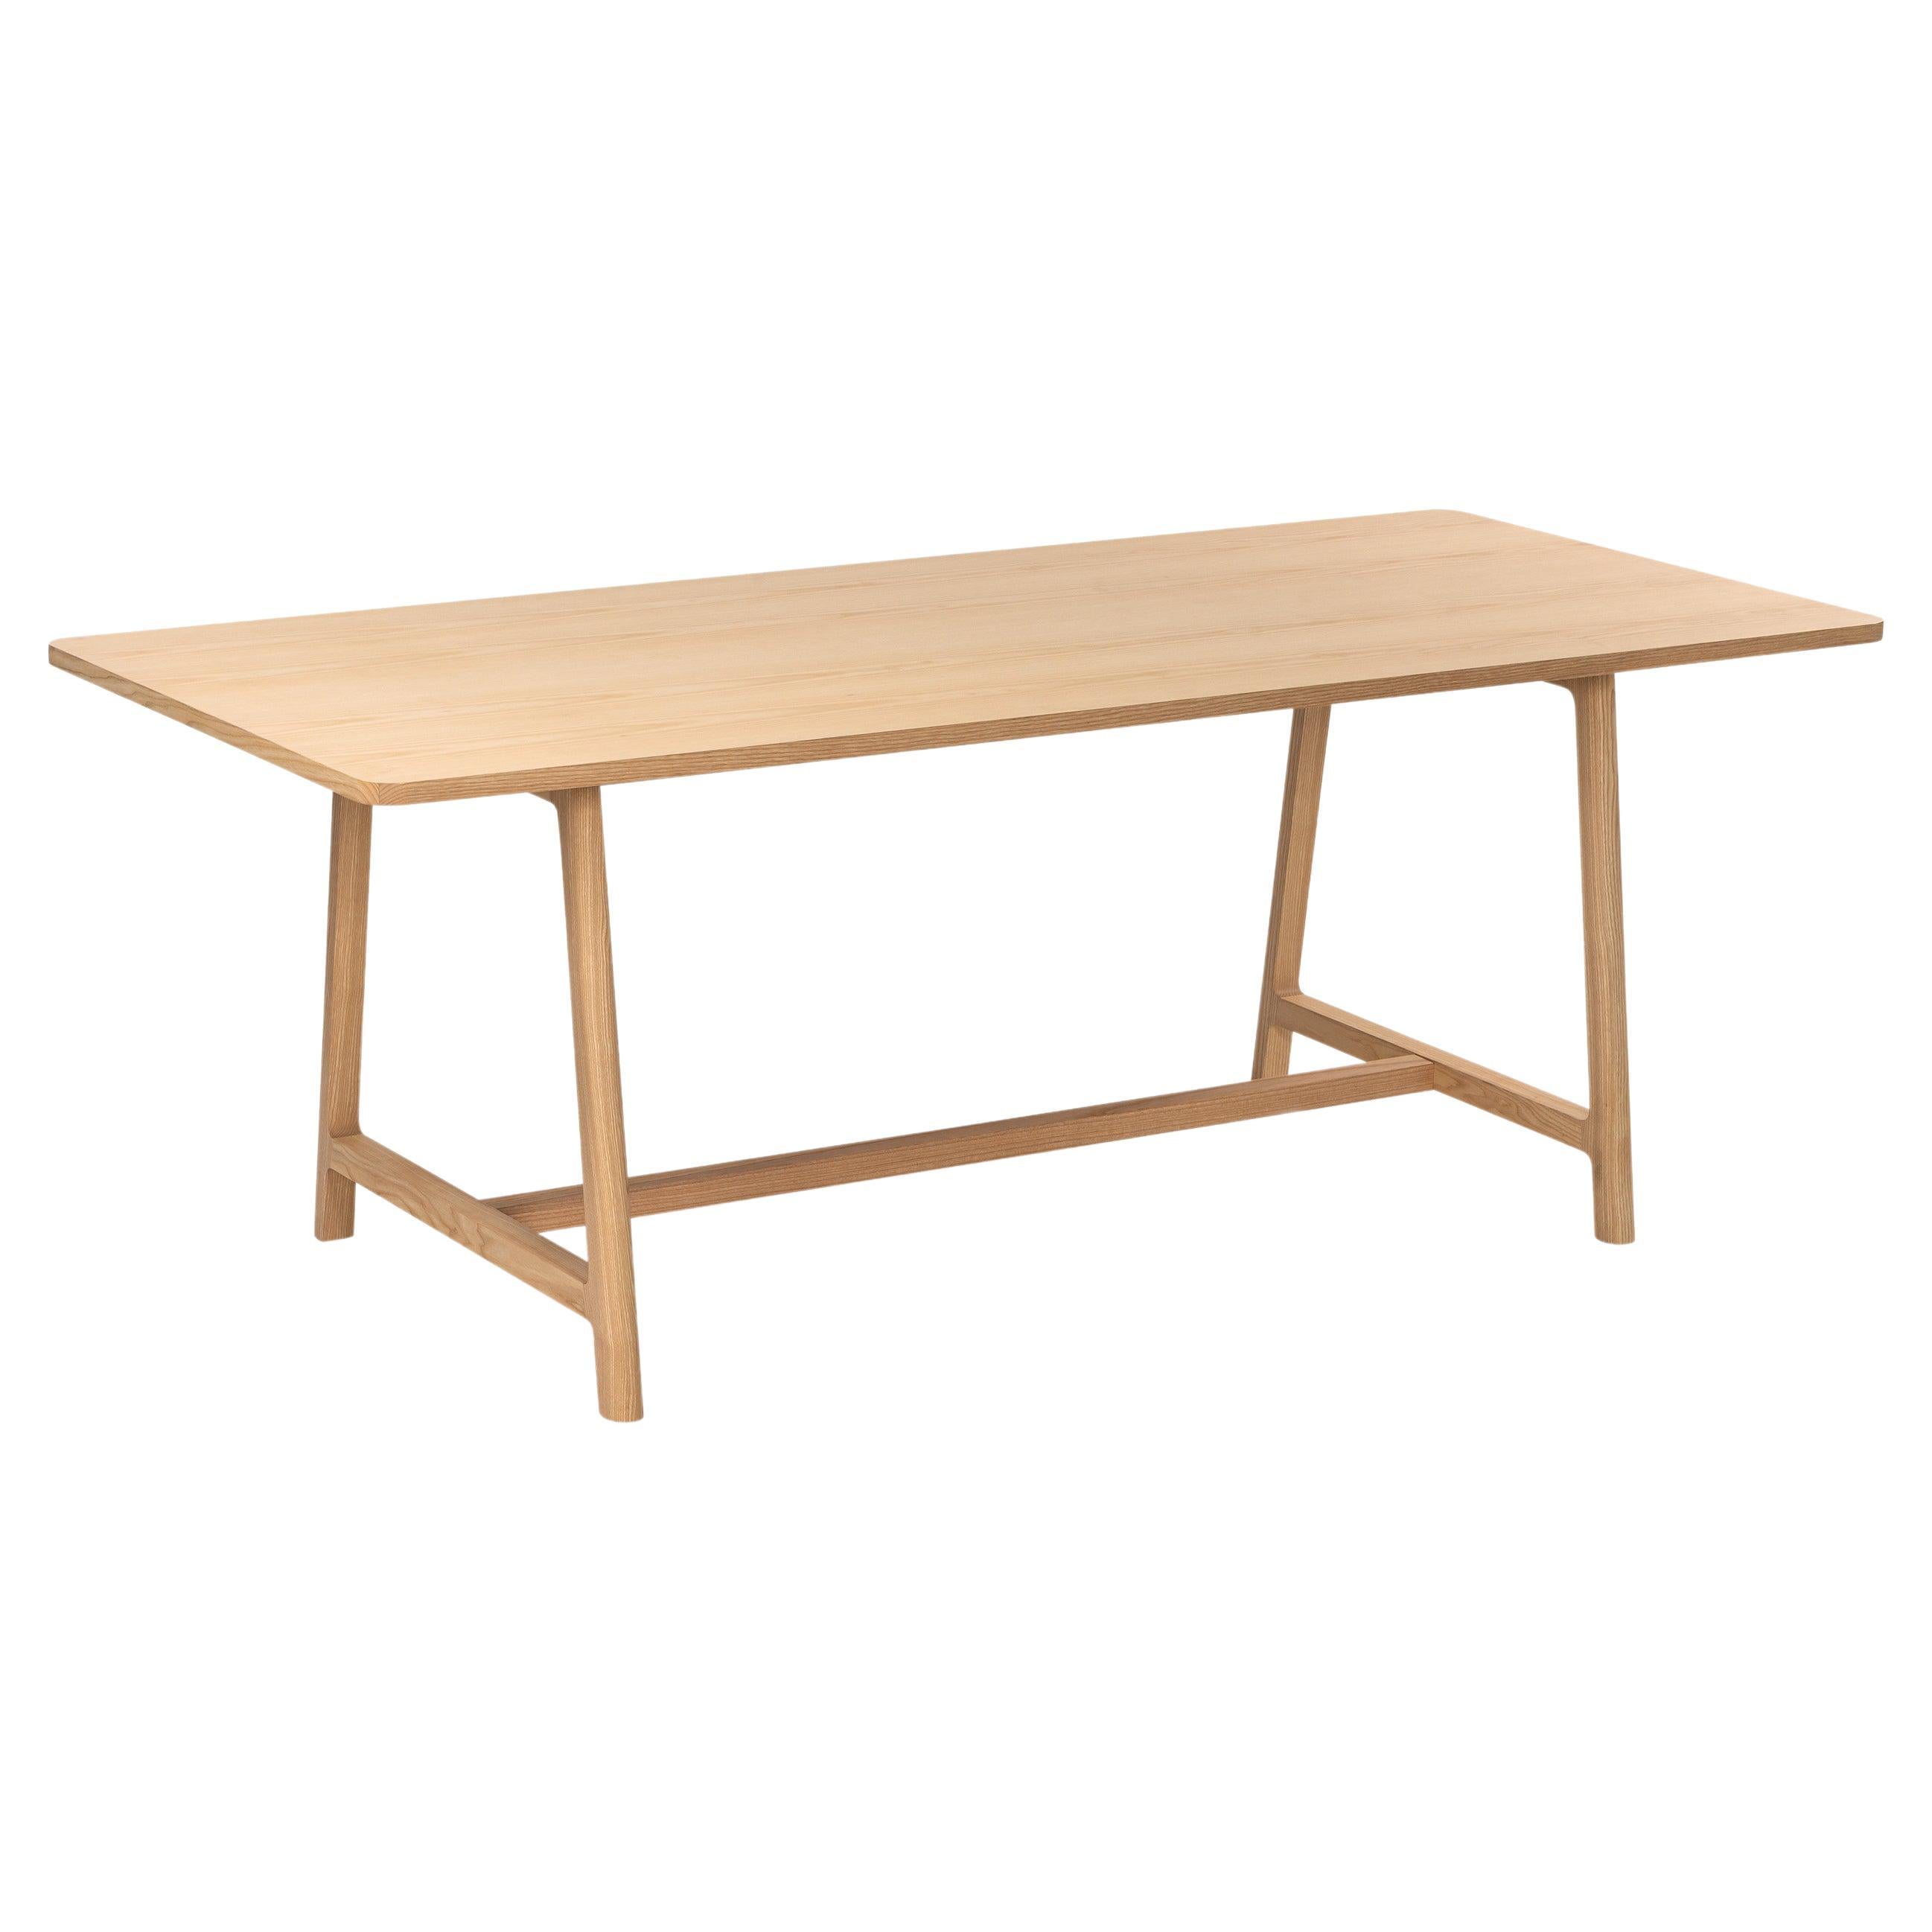 Minimalist Modern Table in Ash Wood FRAME Collection For Sale